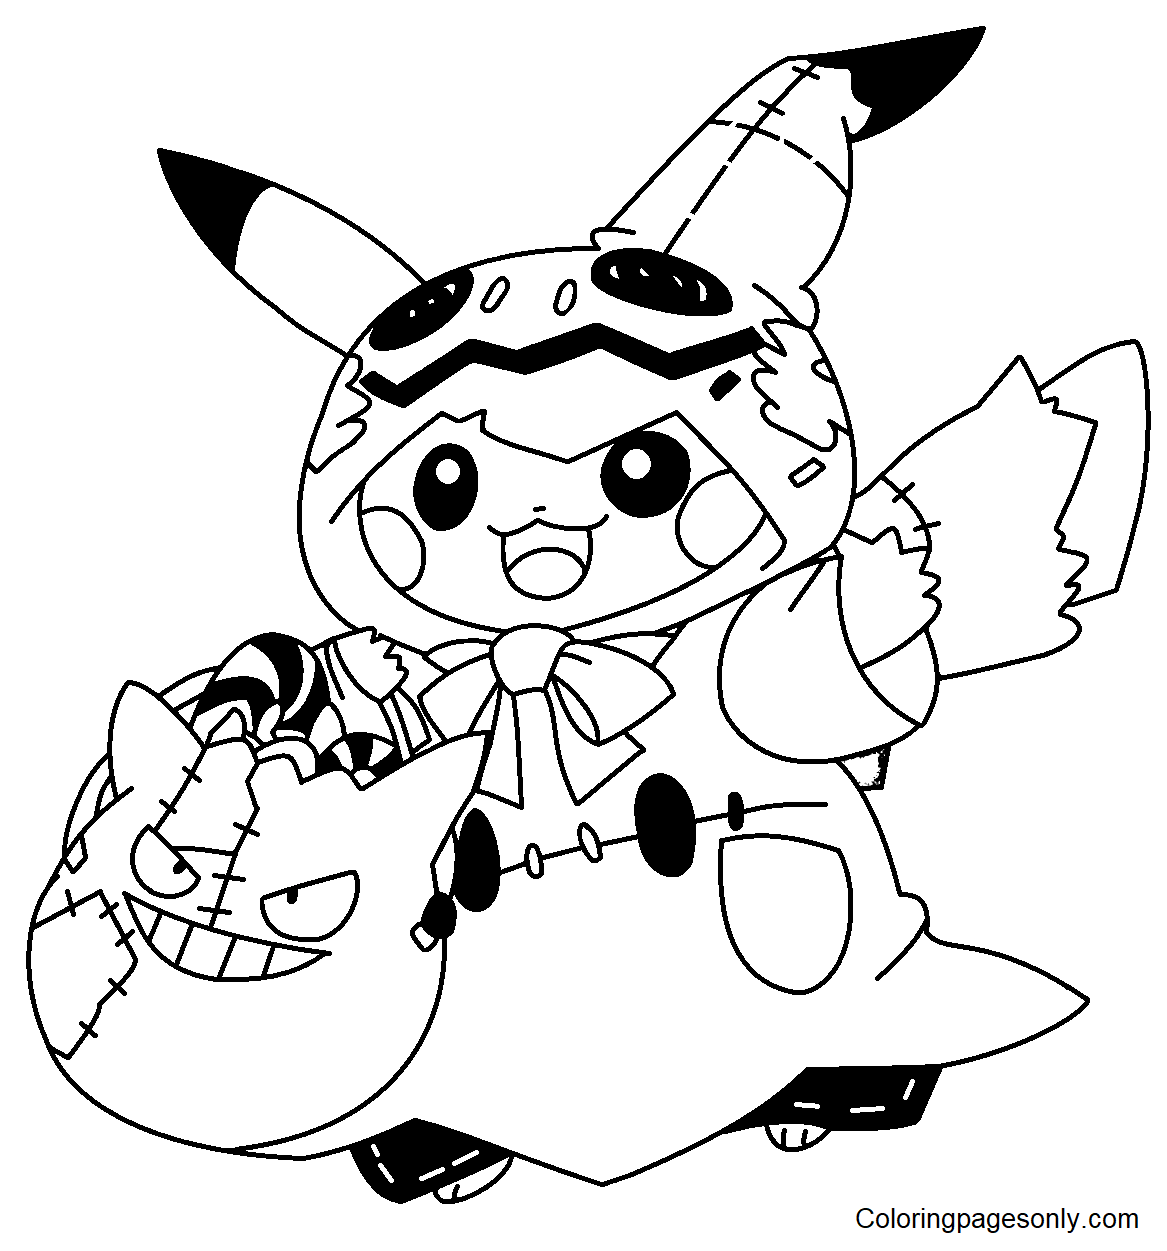 Pokemon Halloween Coloring Pages Coloring Pages For Kids And Adults